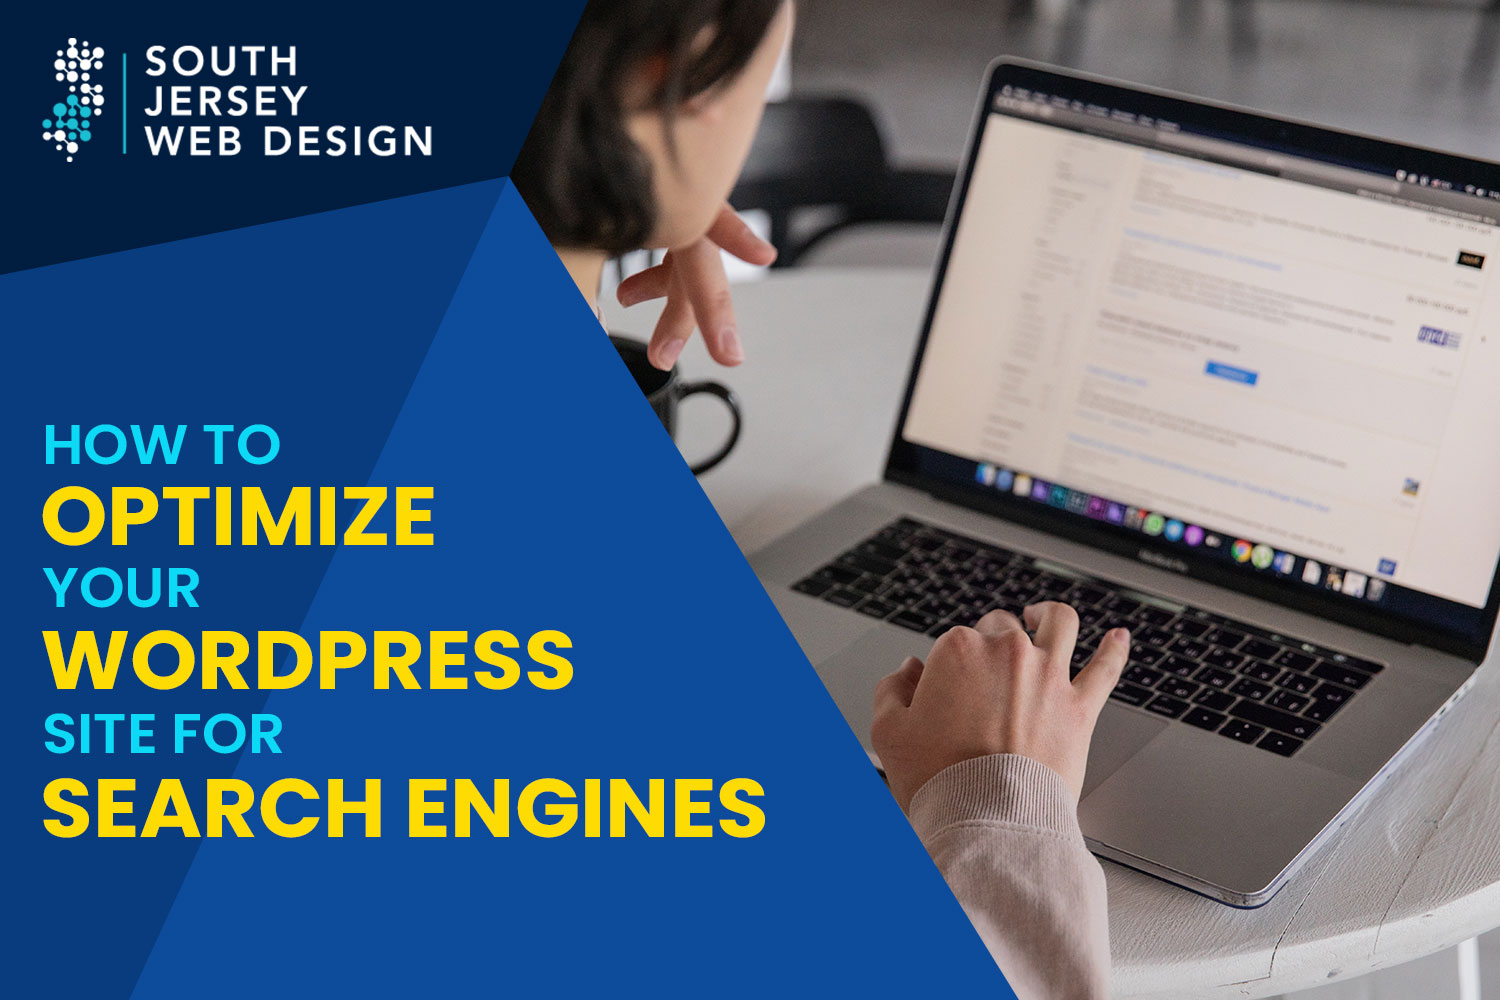 How to optimize your WordPress site for search engines